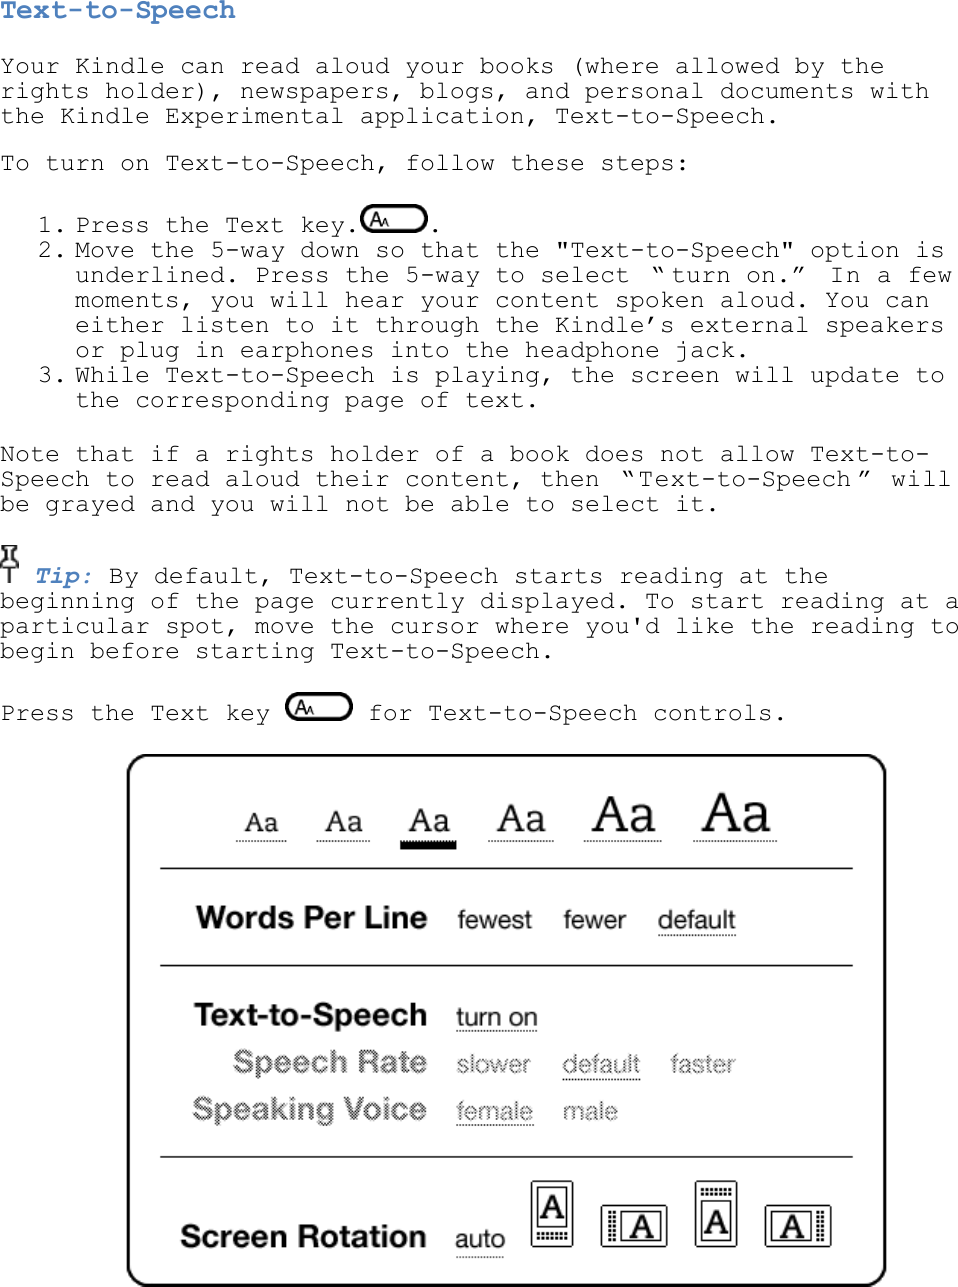   Text-to-Speech Your Kindle can read aloud your books (where allowed by the rights holder), newspapers, blogs, and personal documents with the Kindle Experimental application, Text-to-Speech.    To turn on Text-to-Speech, follow these steps: 1. Press the Text key. .  2. Move the 5-way down so that the &quot;Text-to-Speech&quot; option is underlined. Press the 5-way to select  ― turn on.‖  In a few moments, you will hear your content spoken aloud. You can either listen to it through the Kindle’s external speakers or plug in earphones into the headphone jack.  3. While Text-to-Speech is playing, the screen will update to the corresponding page of text.  Note that if a rights holder of a book does not allow Text-to-Speech to read aloud their content, then  ― Text-to-Speech ‖  will be grayed and you will not be able to select it.  Tip: By default, Text-to-Speech starts reading at the beginning of the page currently displayed. To start reading at a particular spot, move the cursor where you&apos;d like the reading to begin before starting Text-to-Speech. Press the Text key   for Text-to-Speech controls.  